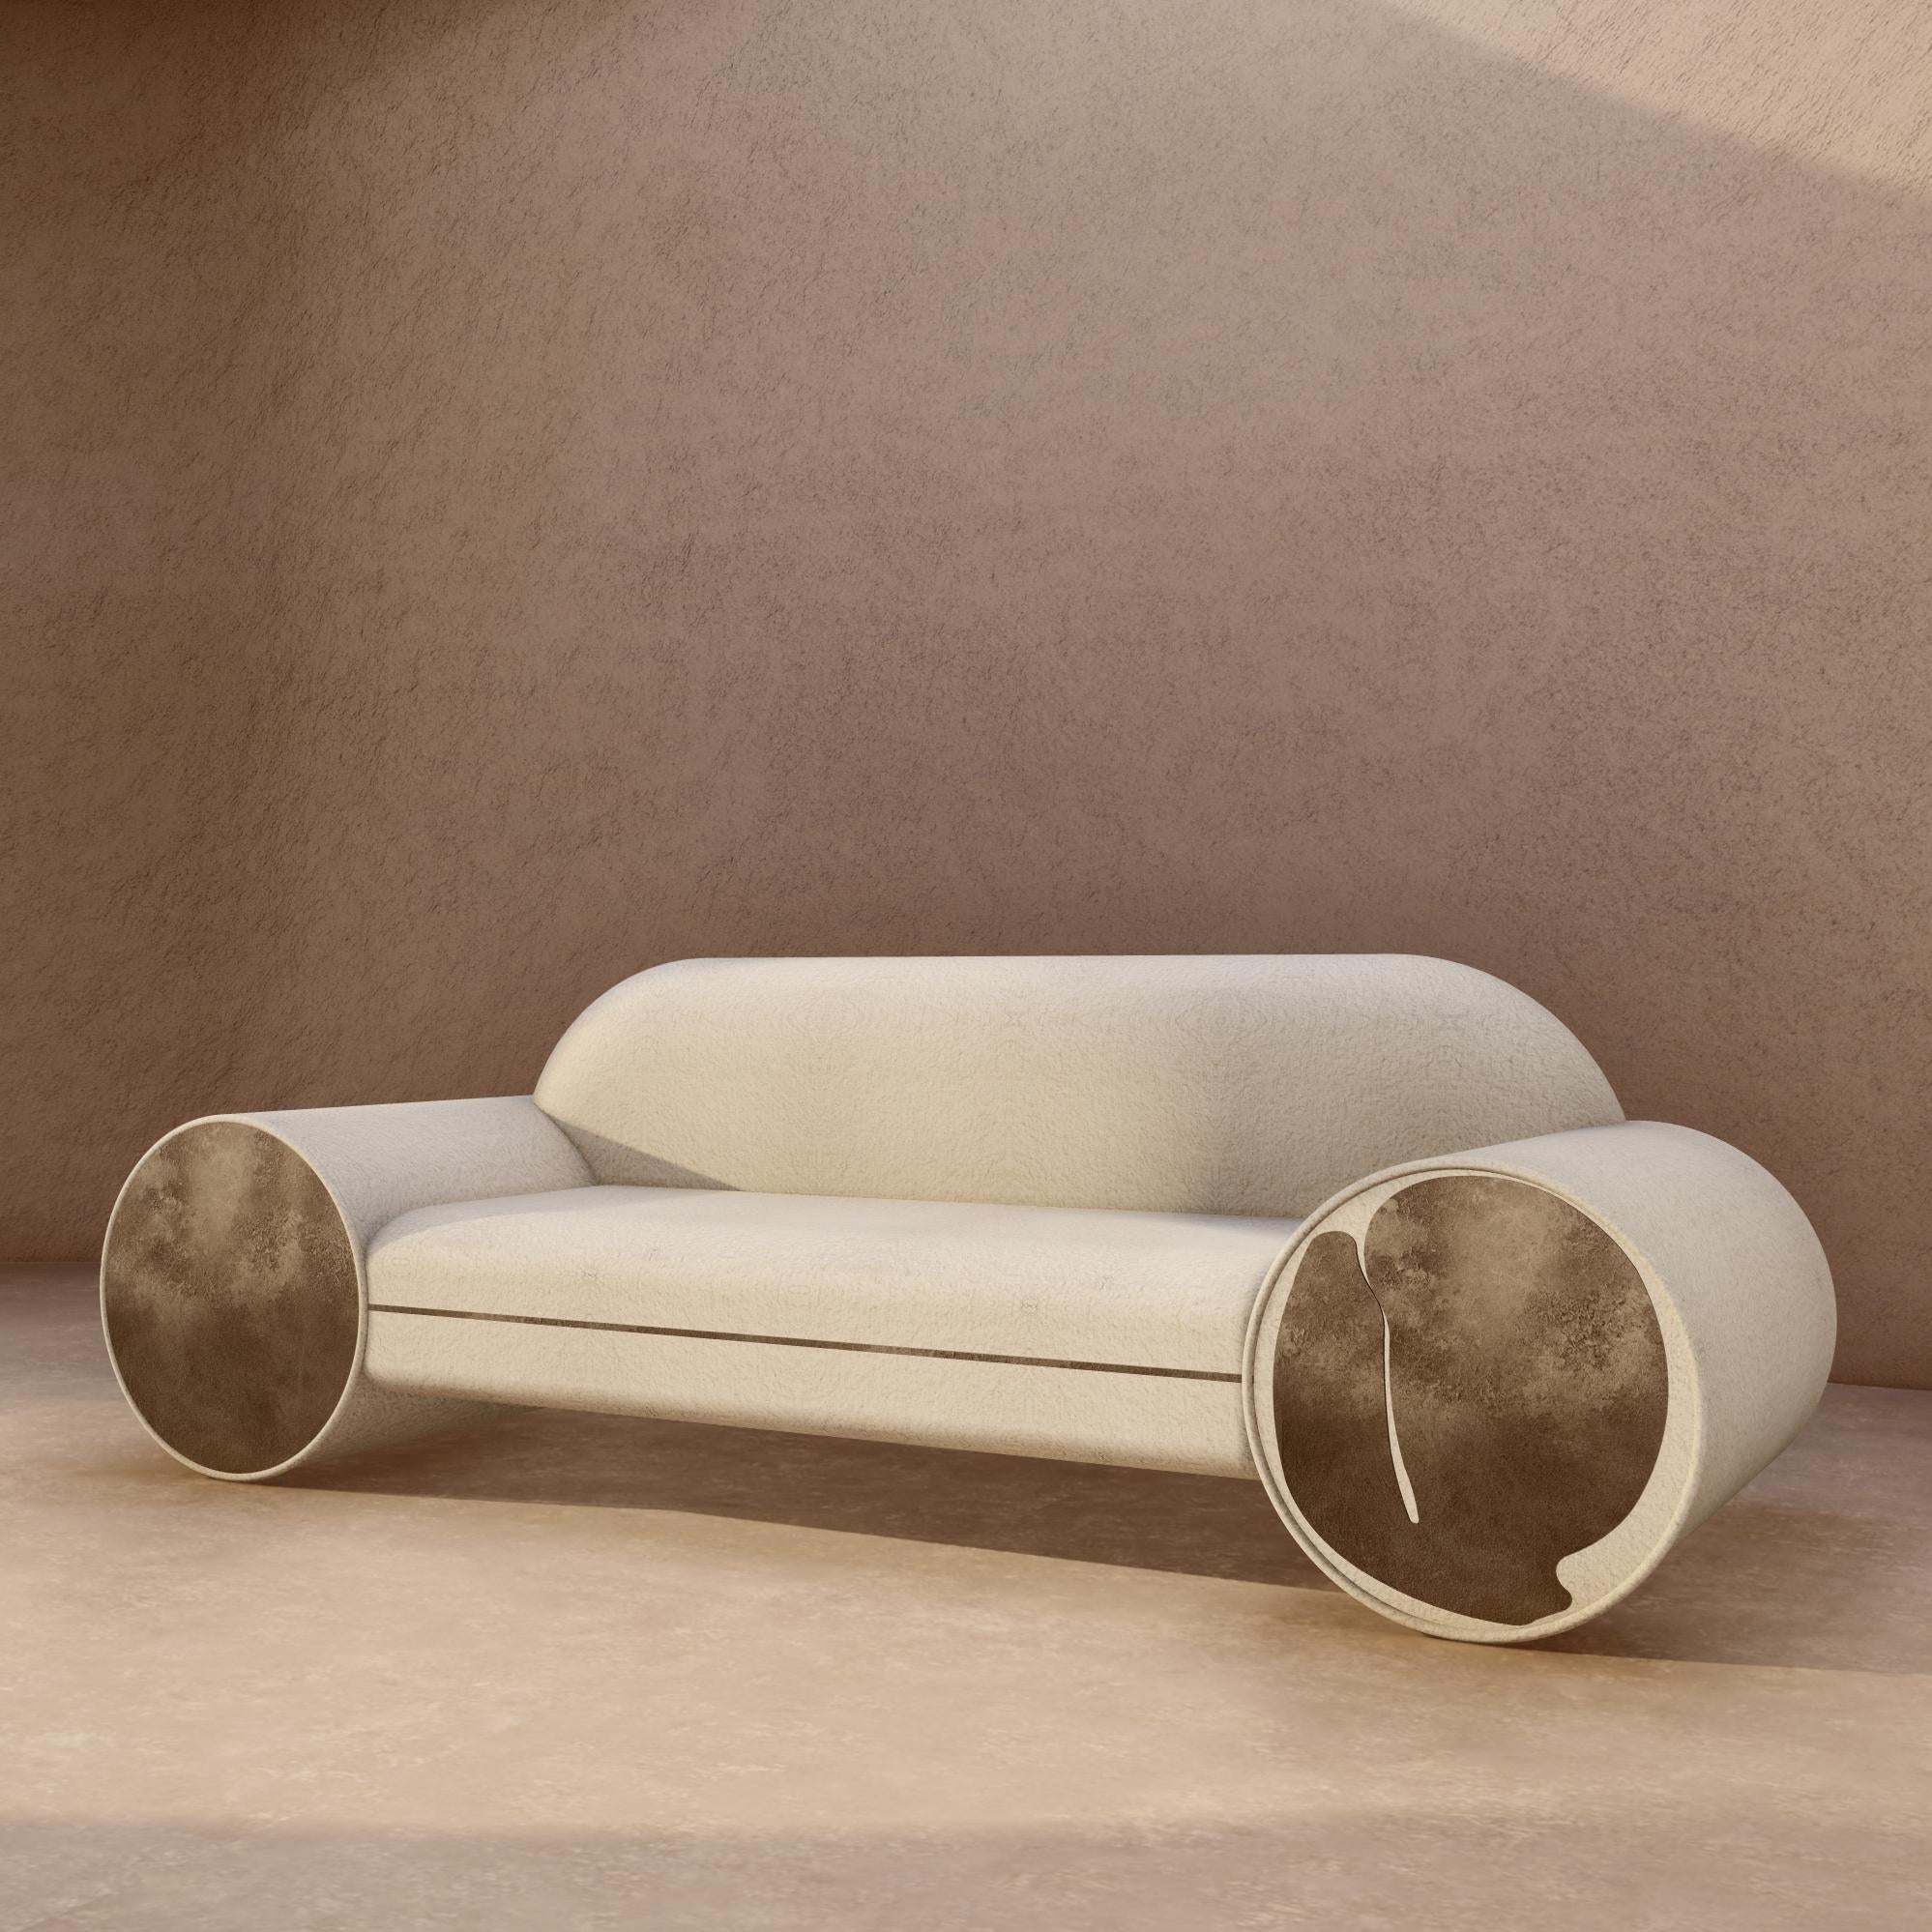 Gulla Jonsdottir
Crater Sofa, 2022
Burnished brass and upholstery
As shown: Rosemary Hallgarten Pebble Bouclé, Alabaster
24 x 98.5 x 36 in
Edition of 12
 
As shown: additional $3,680 net for 16 yards ($230/yard net)